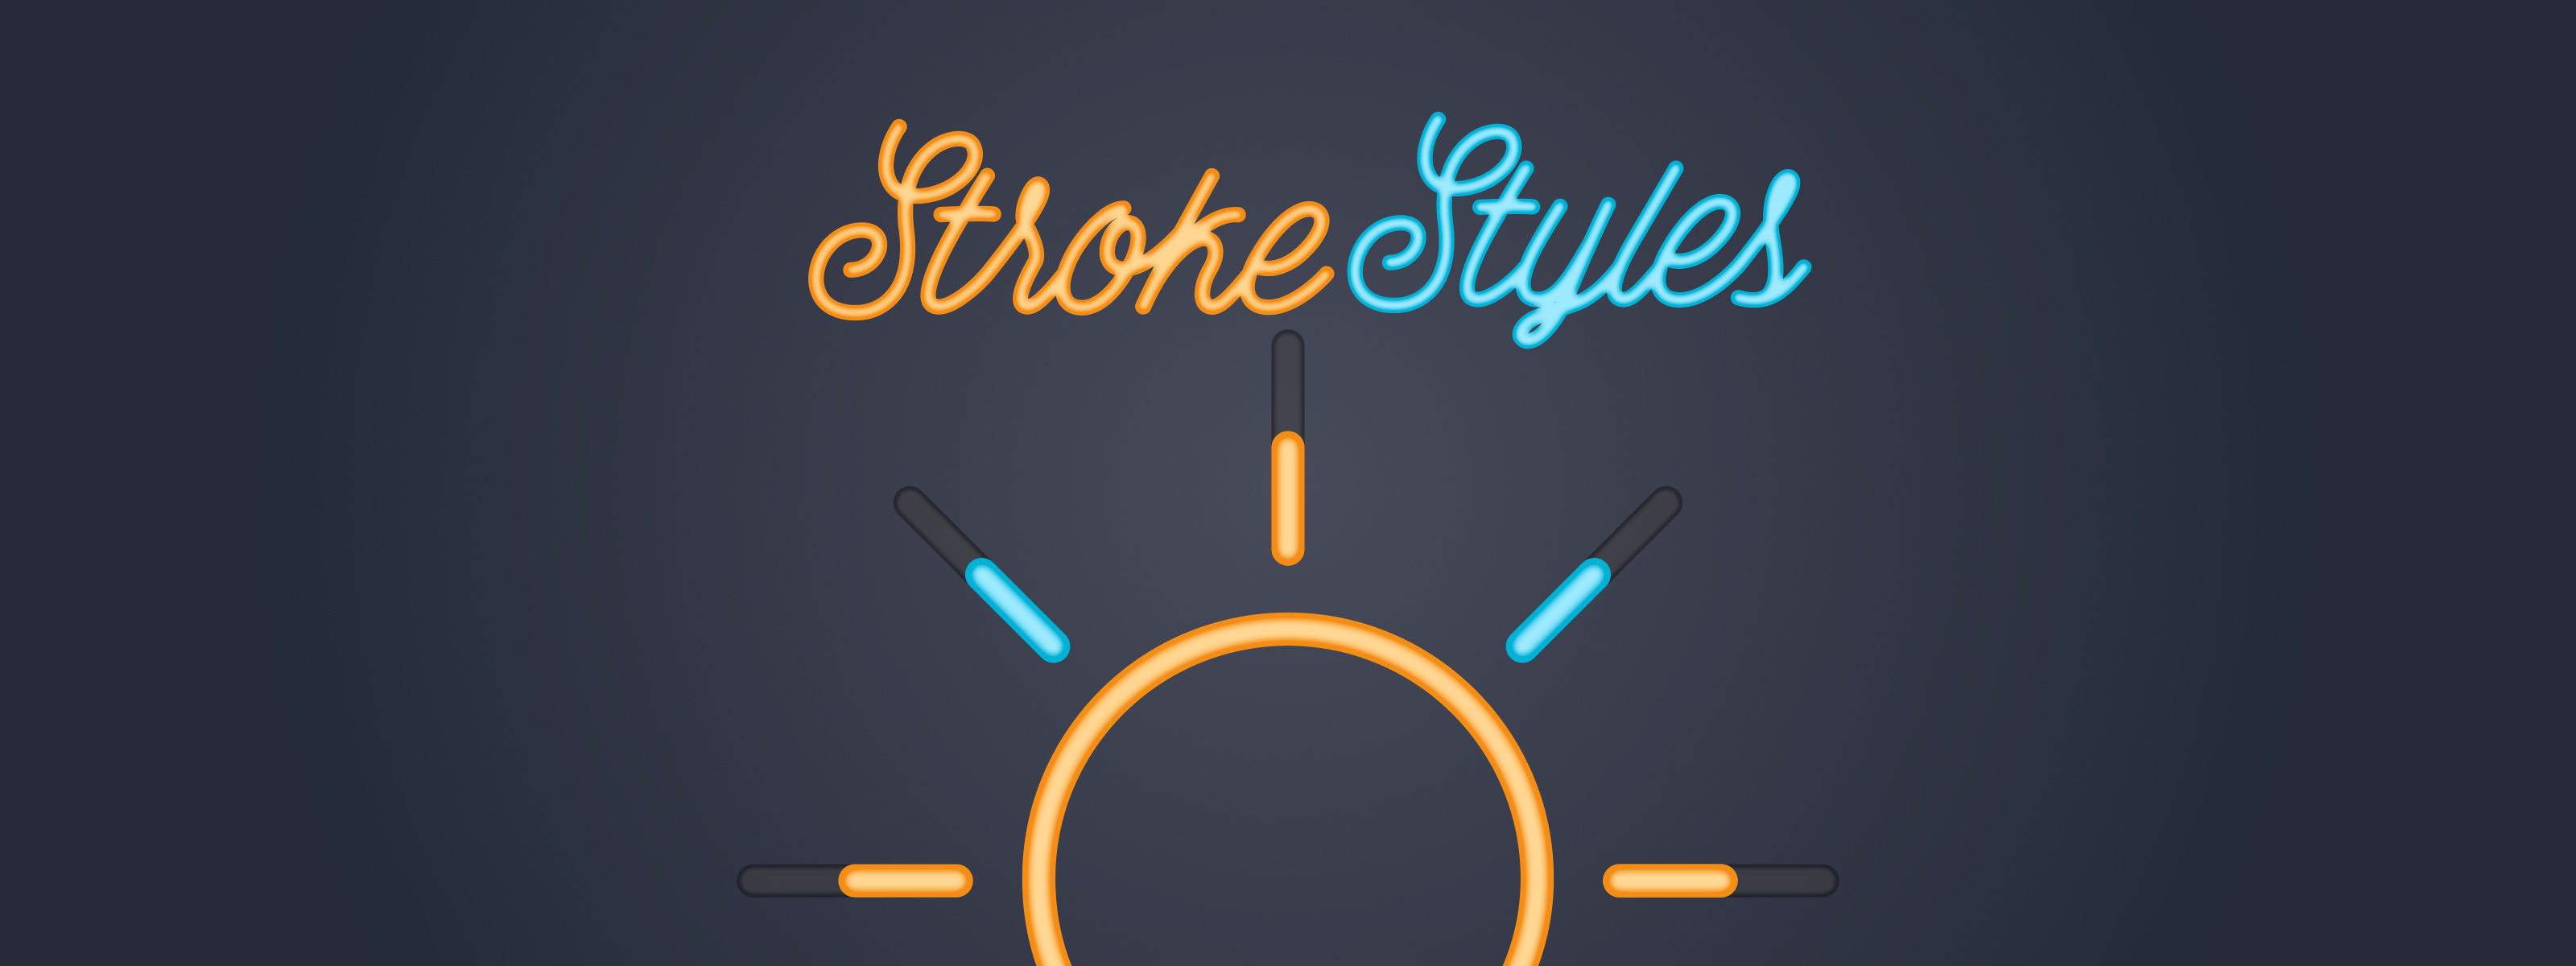 add stroke to layer after effects